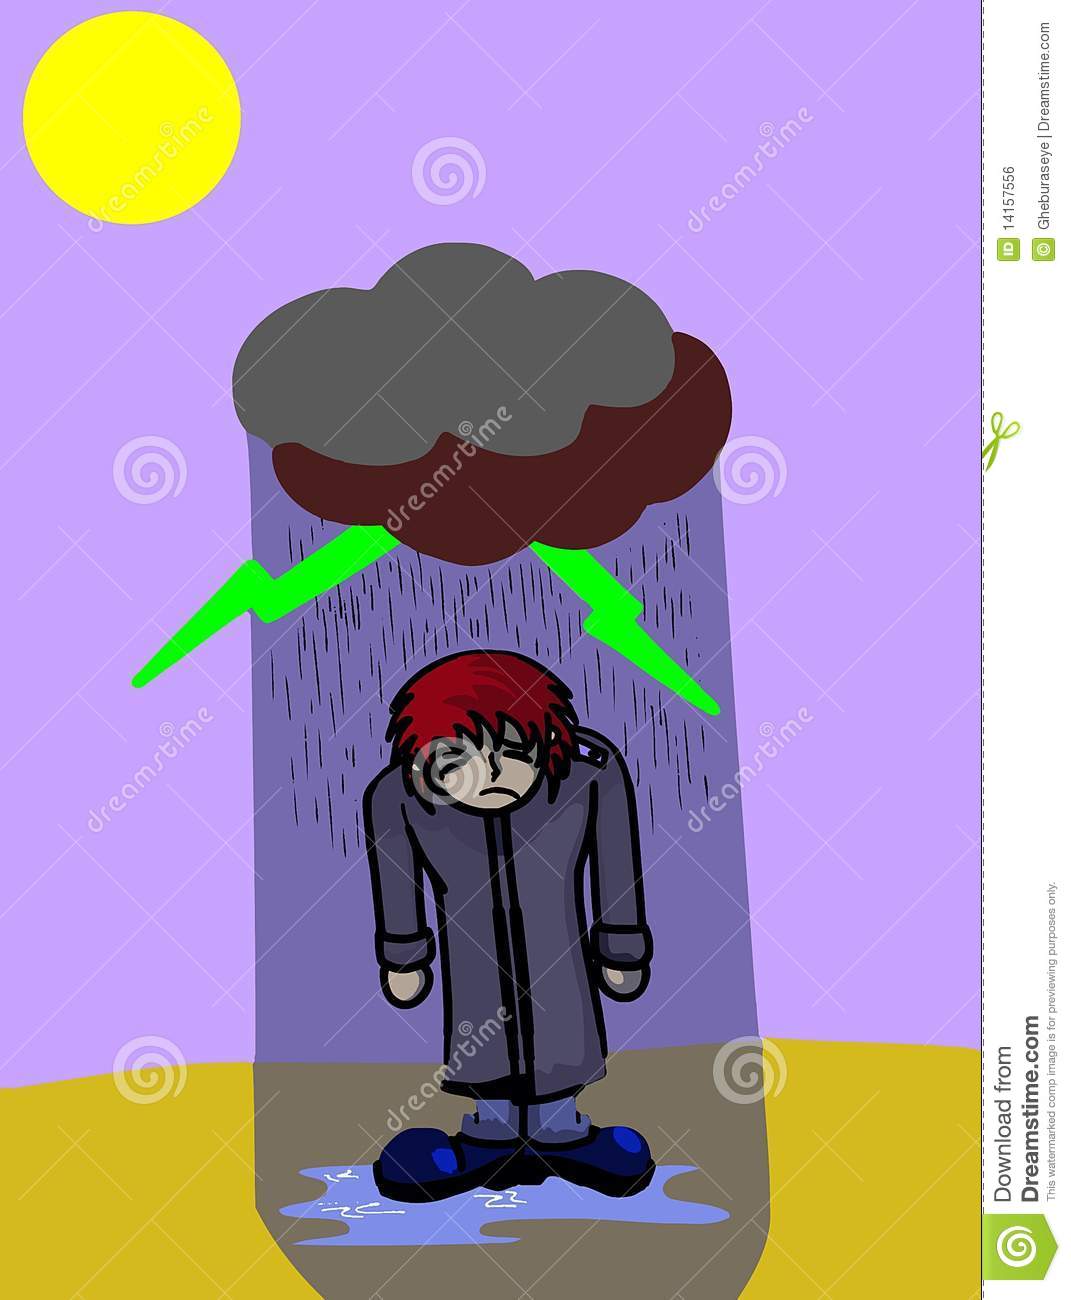 Bad Luck Fun Illustration With Man Under A Cloud Royalty Free Stock